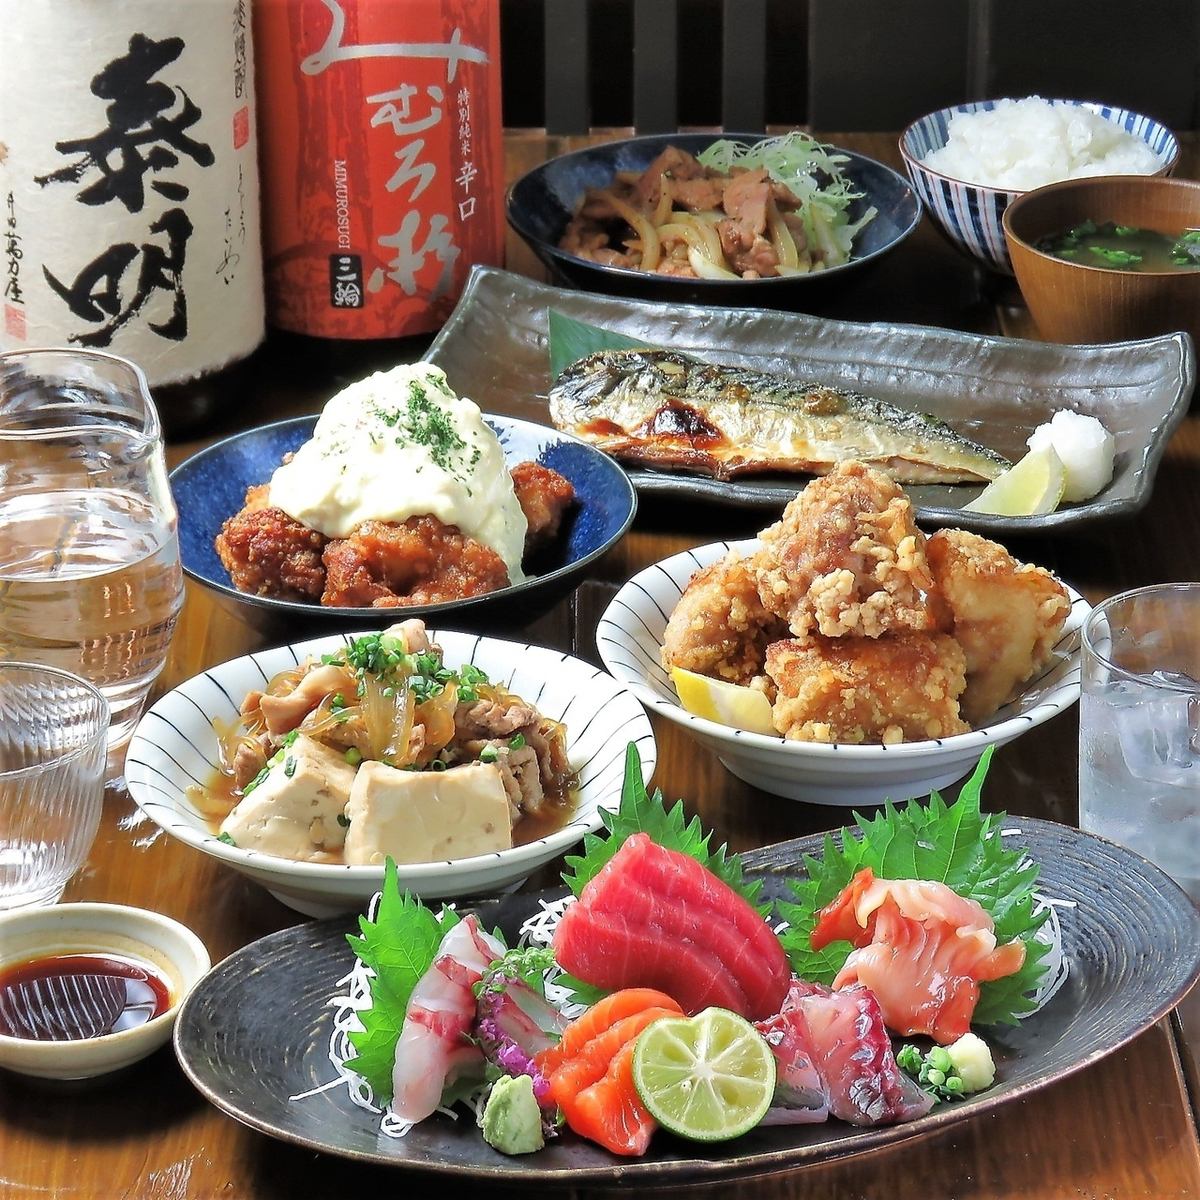 Enjoy izakaya menu items such as rice cooked in an earthenware pot and sashimi together with alcohol. Perfect for drinking parties.